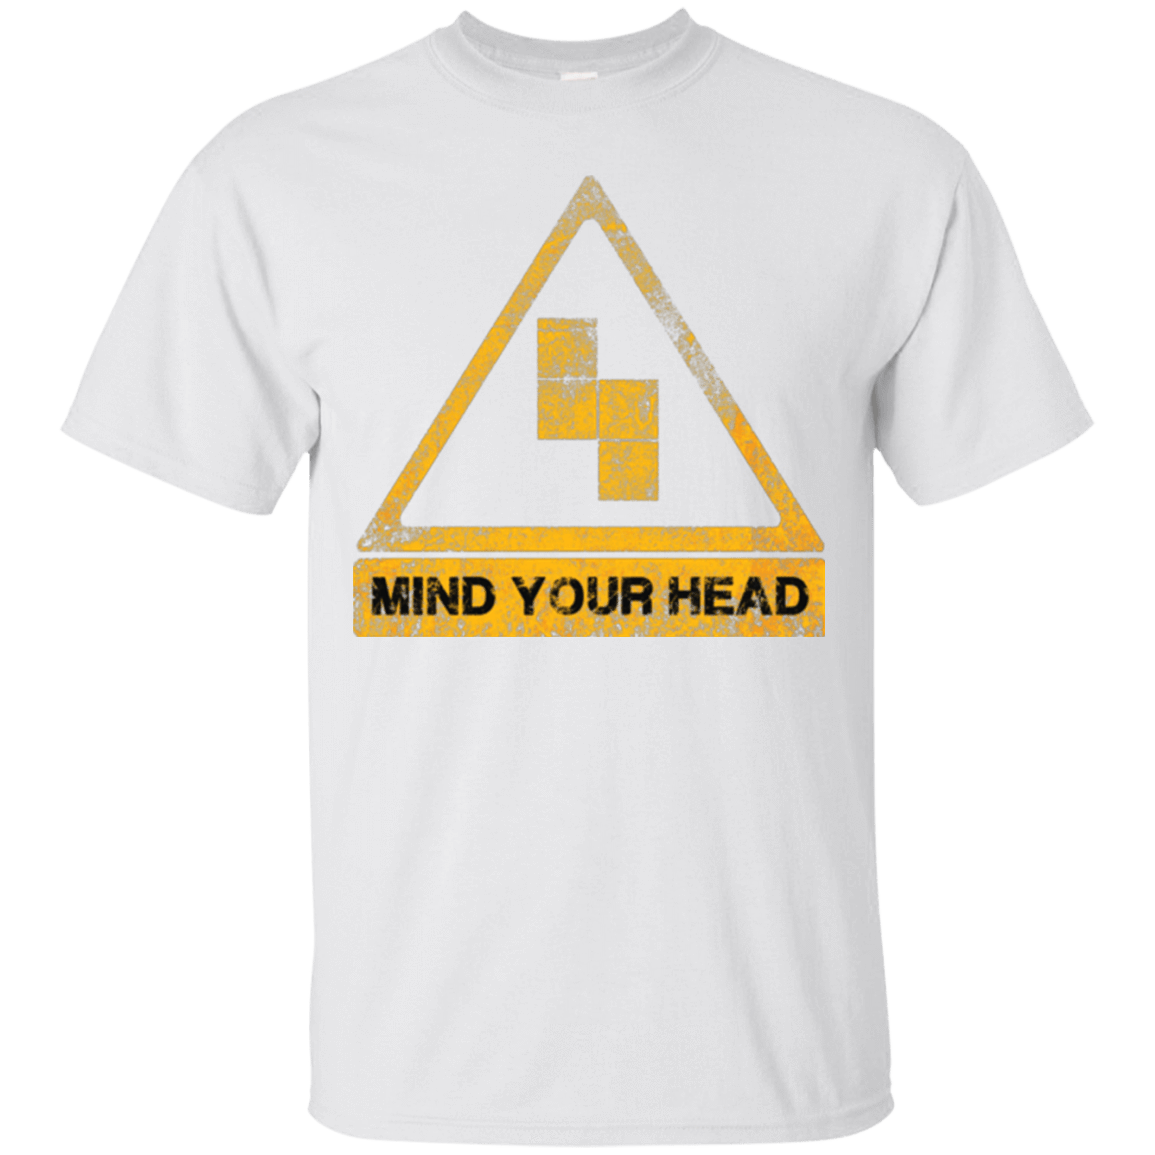 T-Shirts White / Small MIND YOUR HEAD T-Shirt